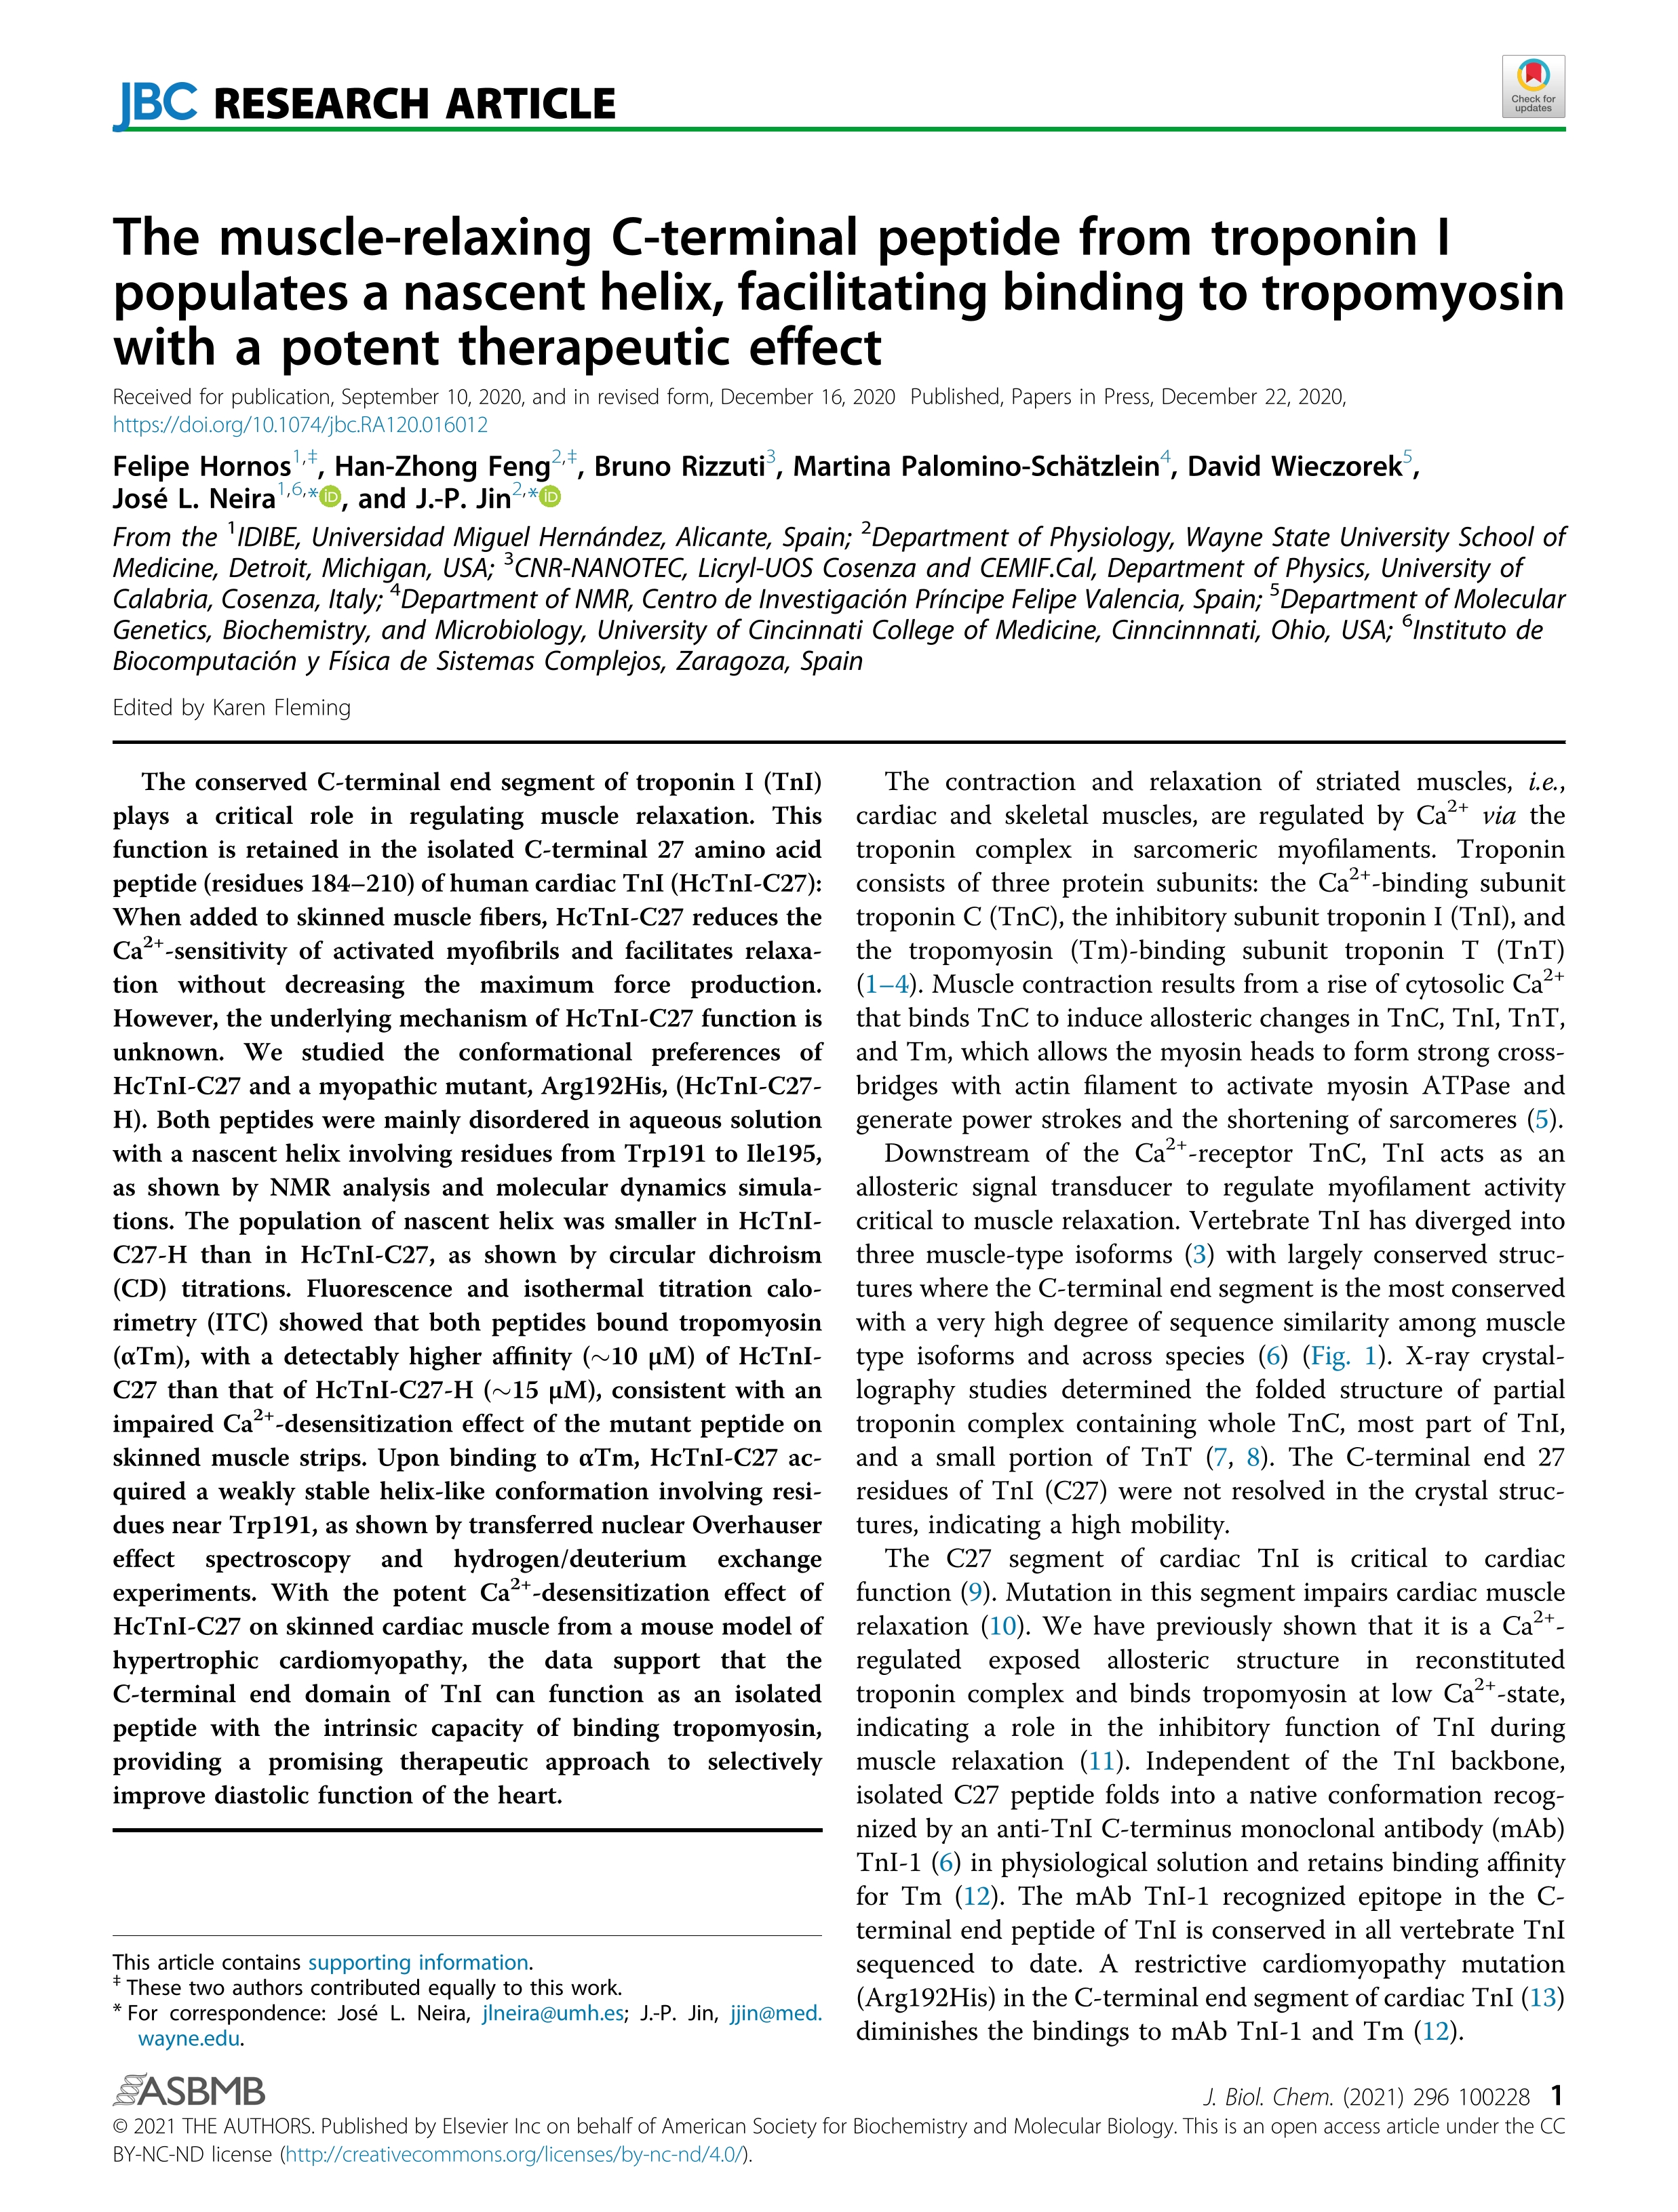 The muscle-relaxing C-terminal peptide from troponin I populates a nascent helix, facilitating binding to tropomyosin with a potent therapeutic effect